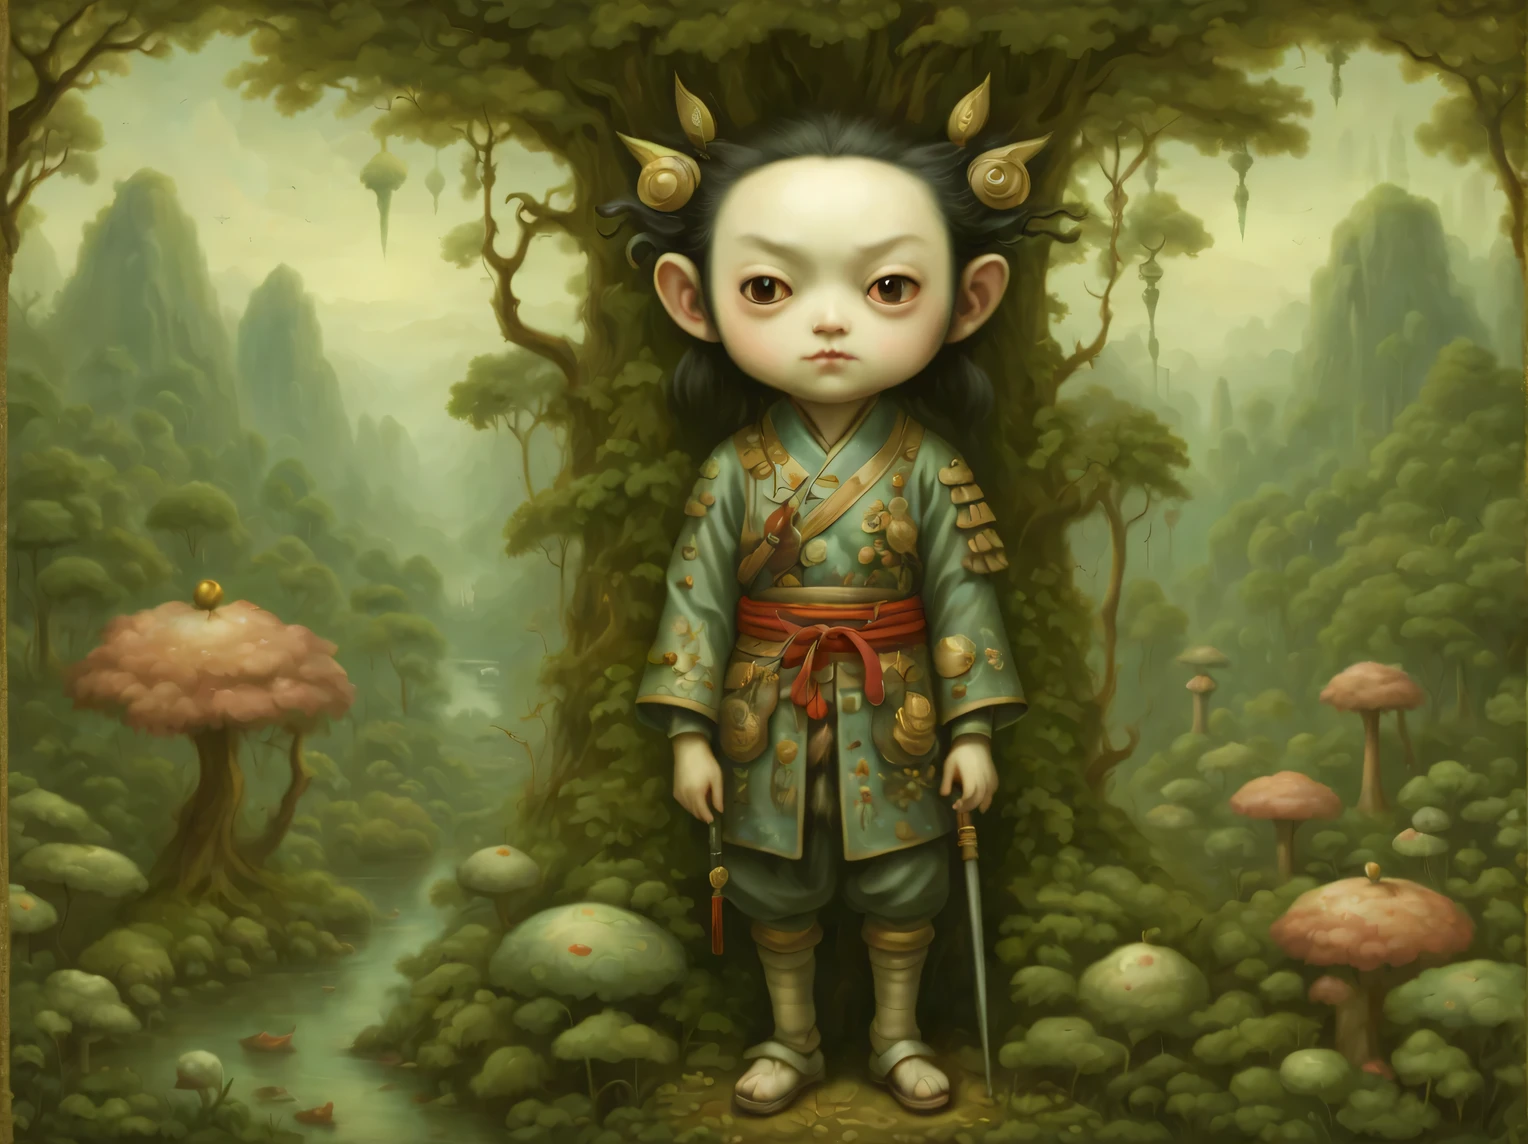 The neural network draws a picture against the backdrop of a surreal Asian jungle, heroic samurai from another world, samurai looks majestic, beautiful samurai clothes, slim tall build, Developed muscles, loose hair, A high resolution, High detail, clarity 32 thousand., A high resolution, -bit color depth, (Mark Ryden: 1.5155), (Xue Wang: 1.1155), (Do it:1.255), bulk, Beautiful Image, High detail